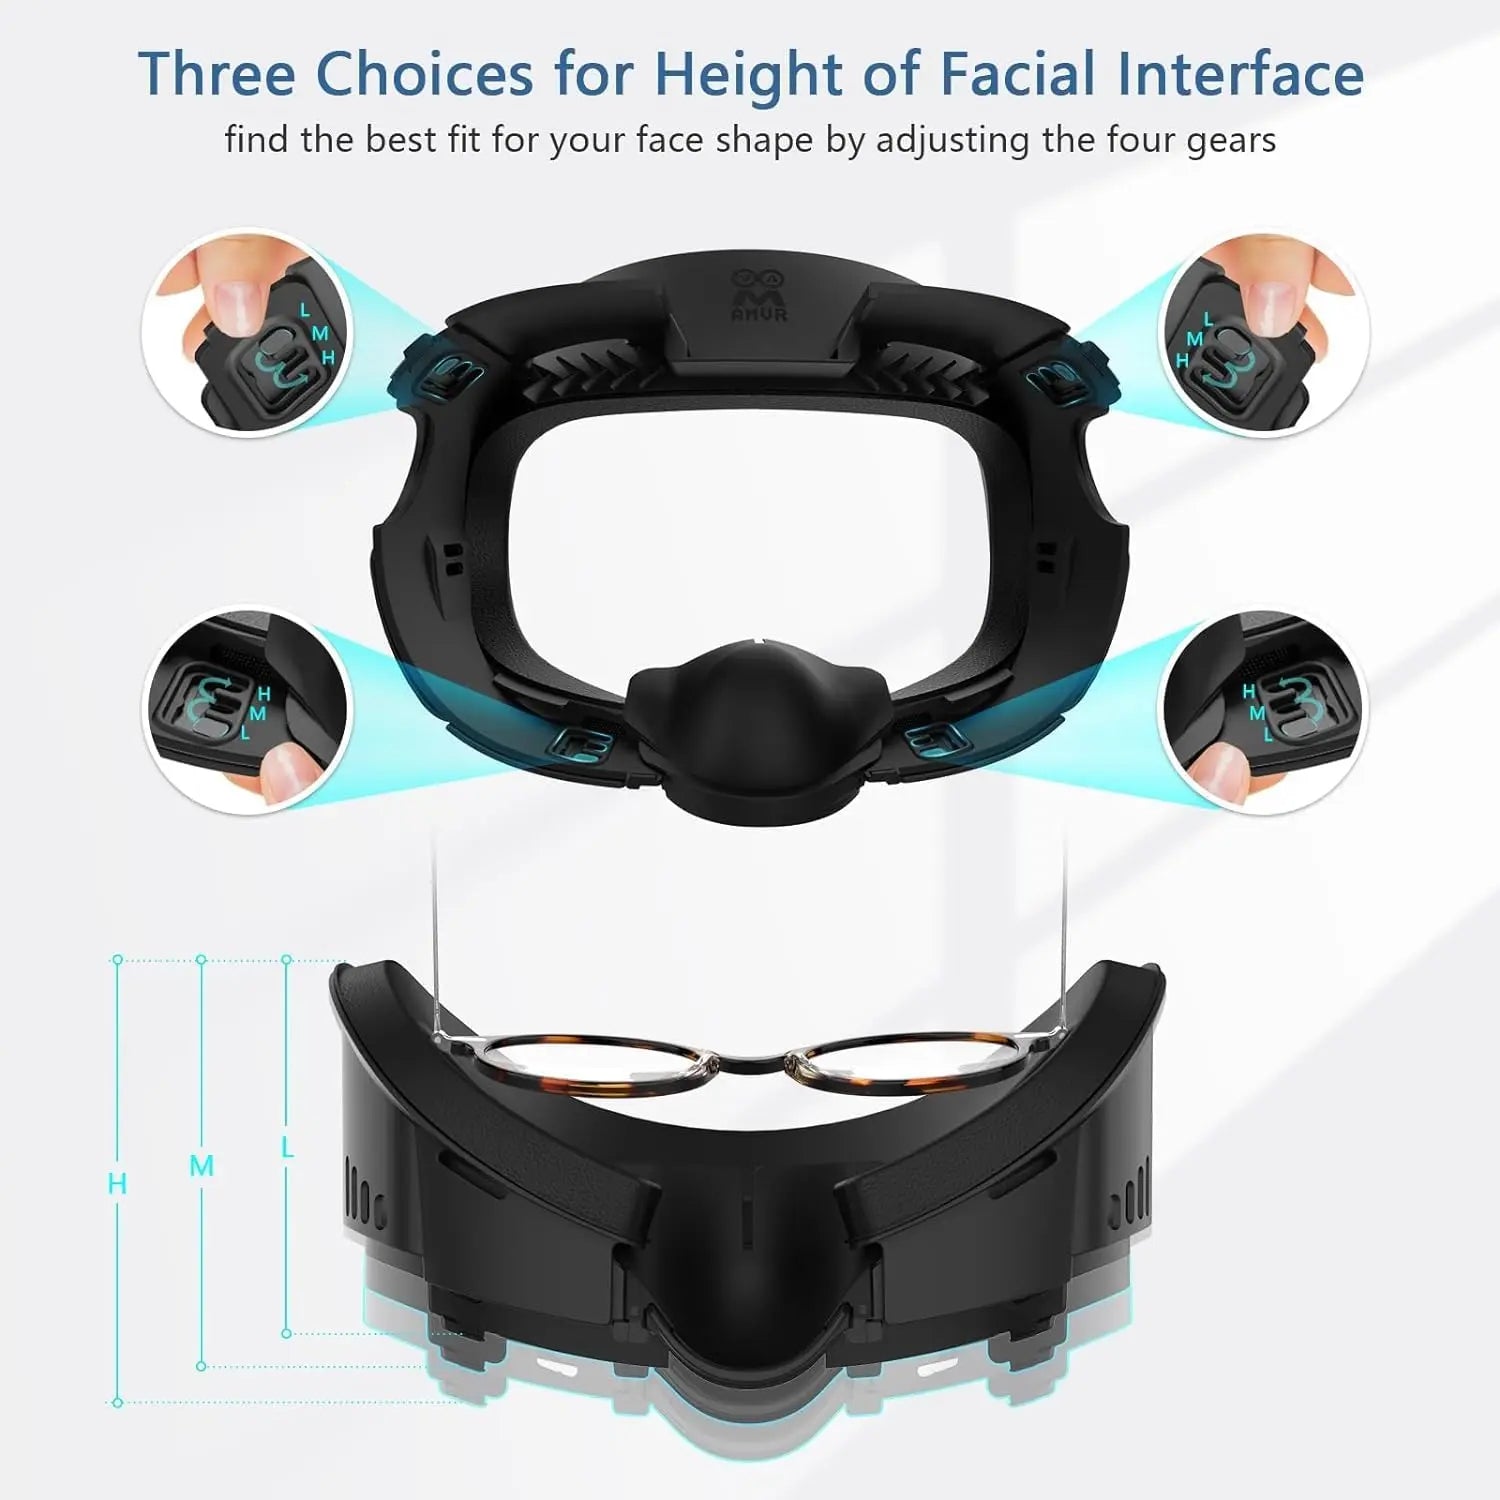 Vrcover quest 3 facial interface : r/oculus